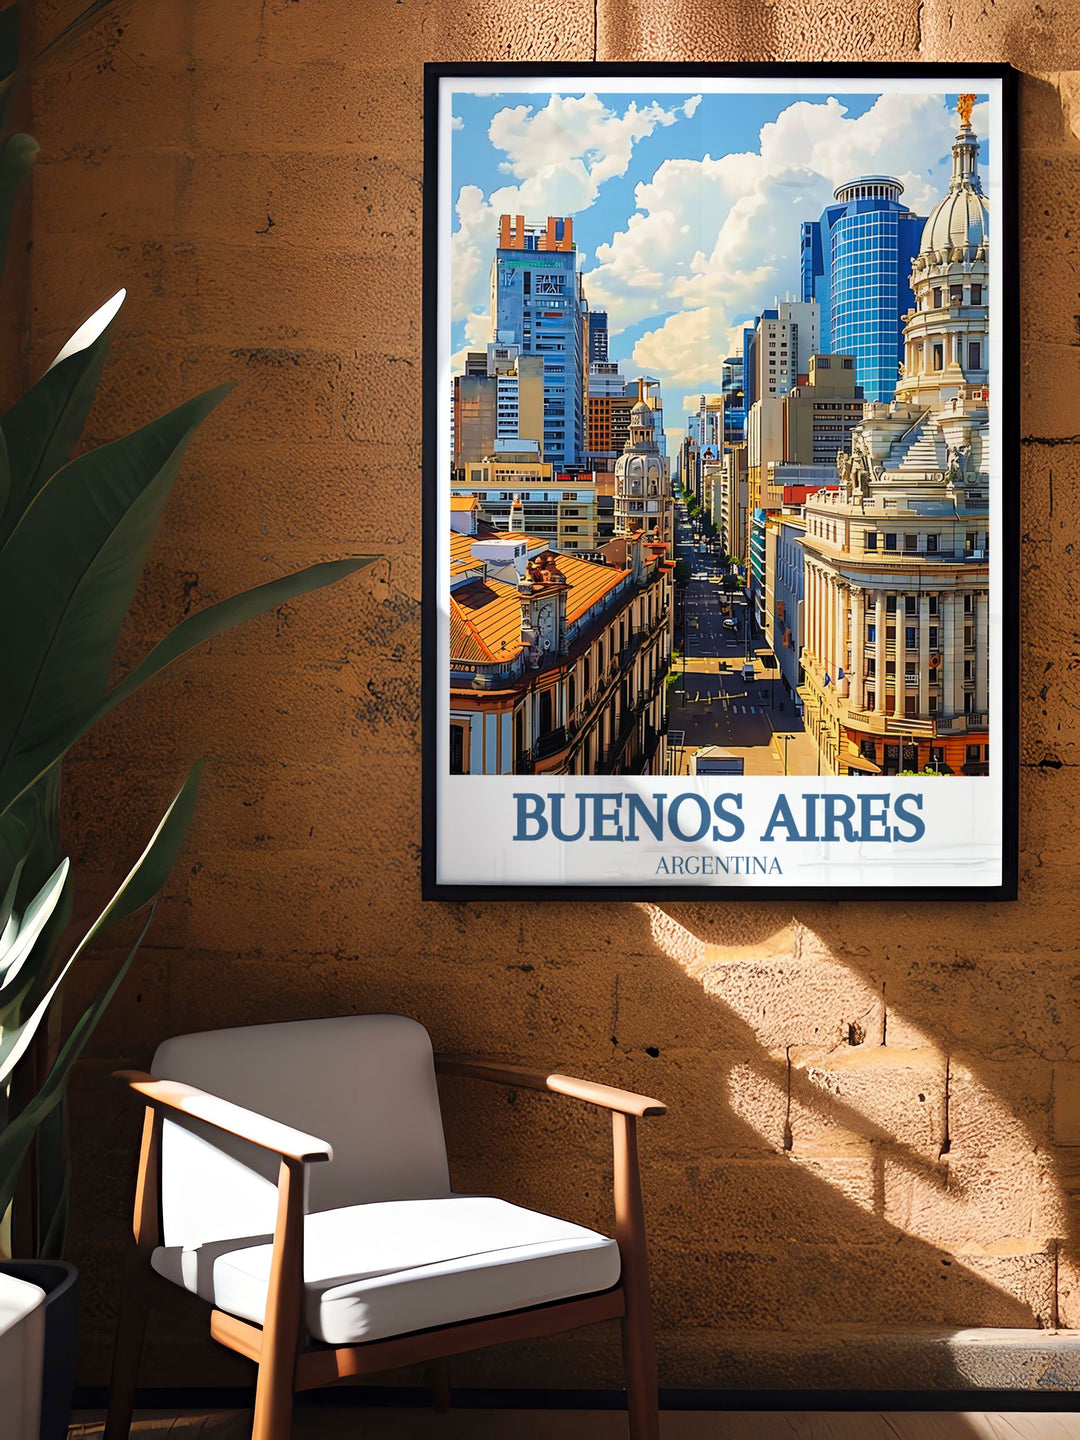 Stunning Buenos Aires travel print highlighting the iconic Plaza de Mayo and the elegant Casa Rosada, ideal for history enthusiasts and lovers of architectural beauty.